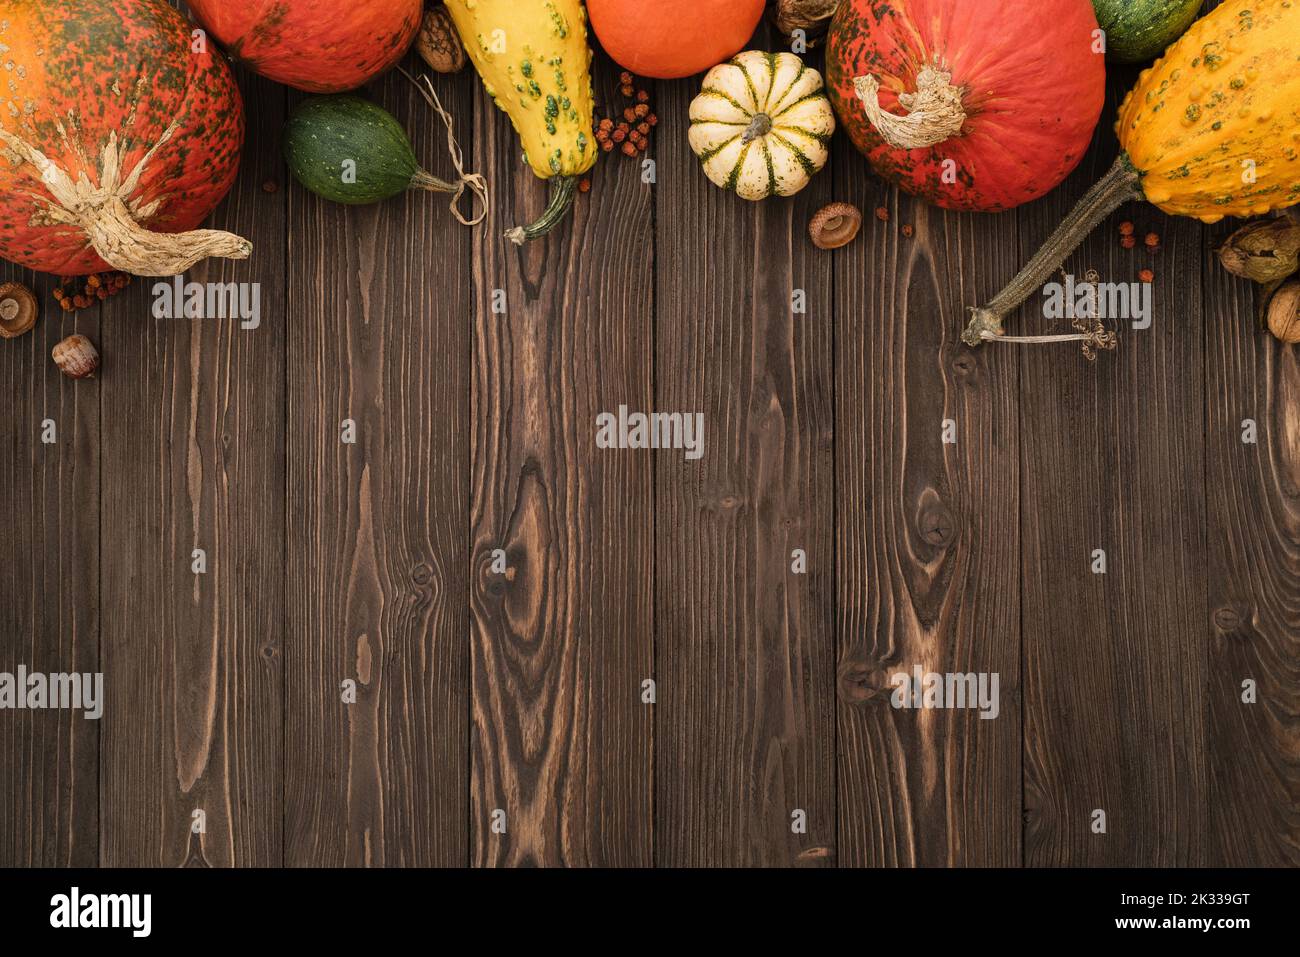 Autumn vintage background with harvest of pumpkins and decorative gourds Stock Photo